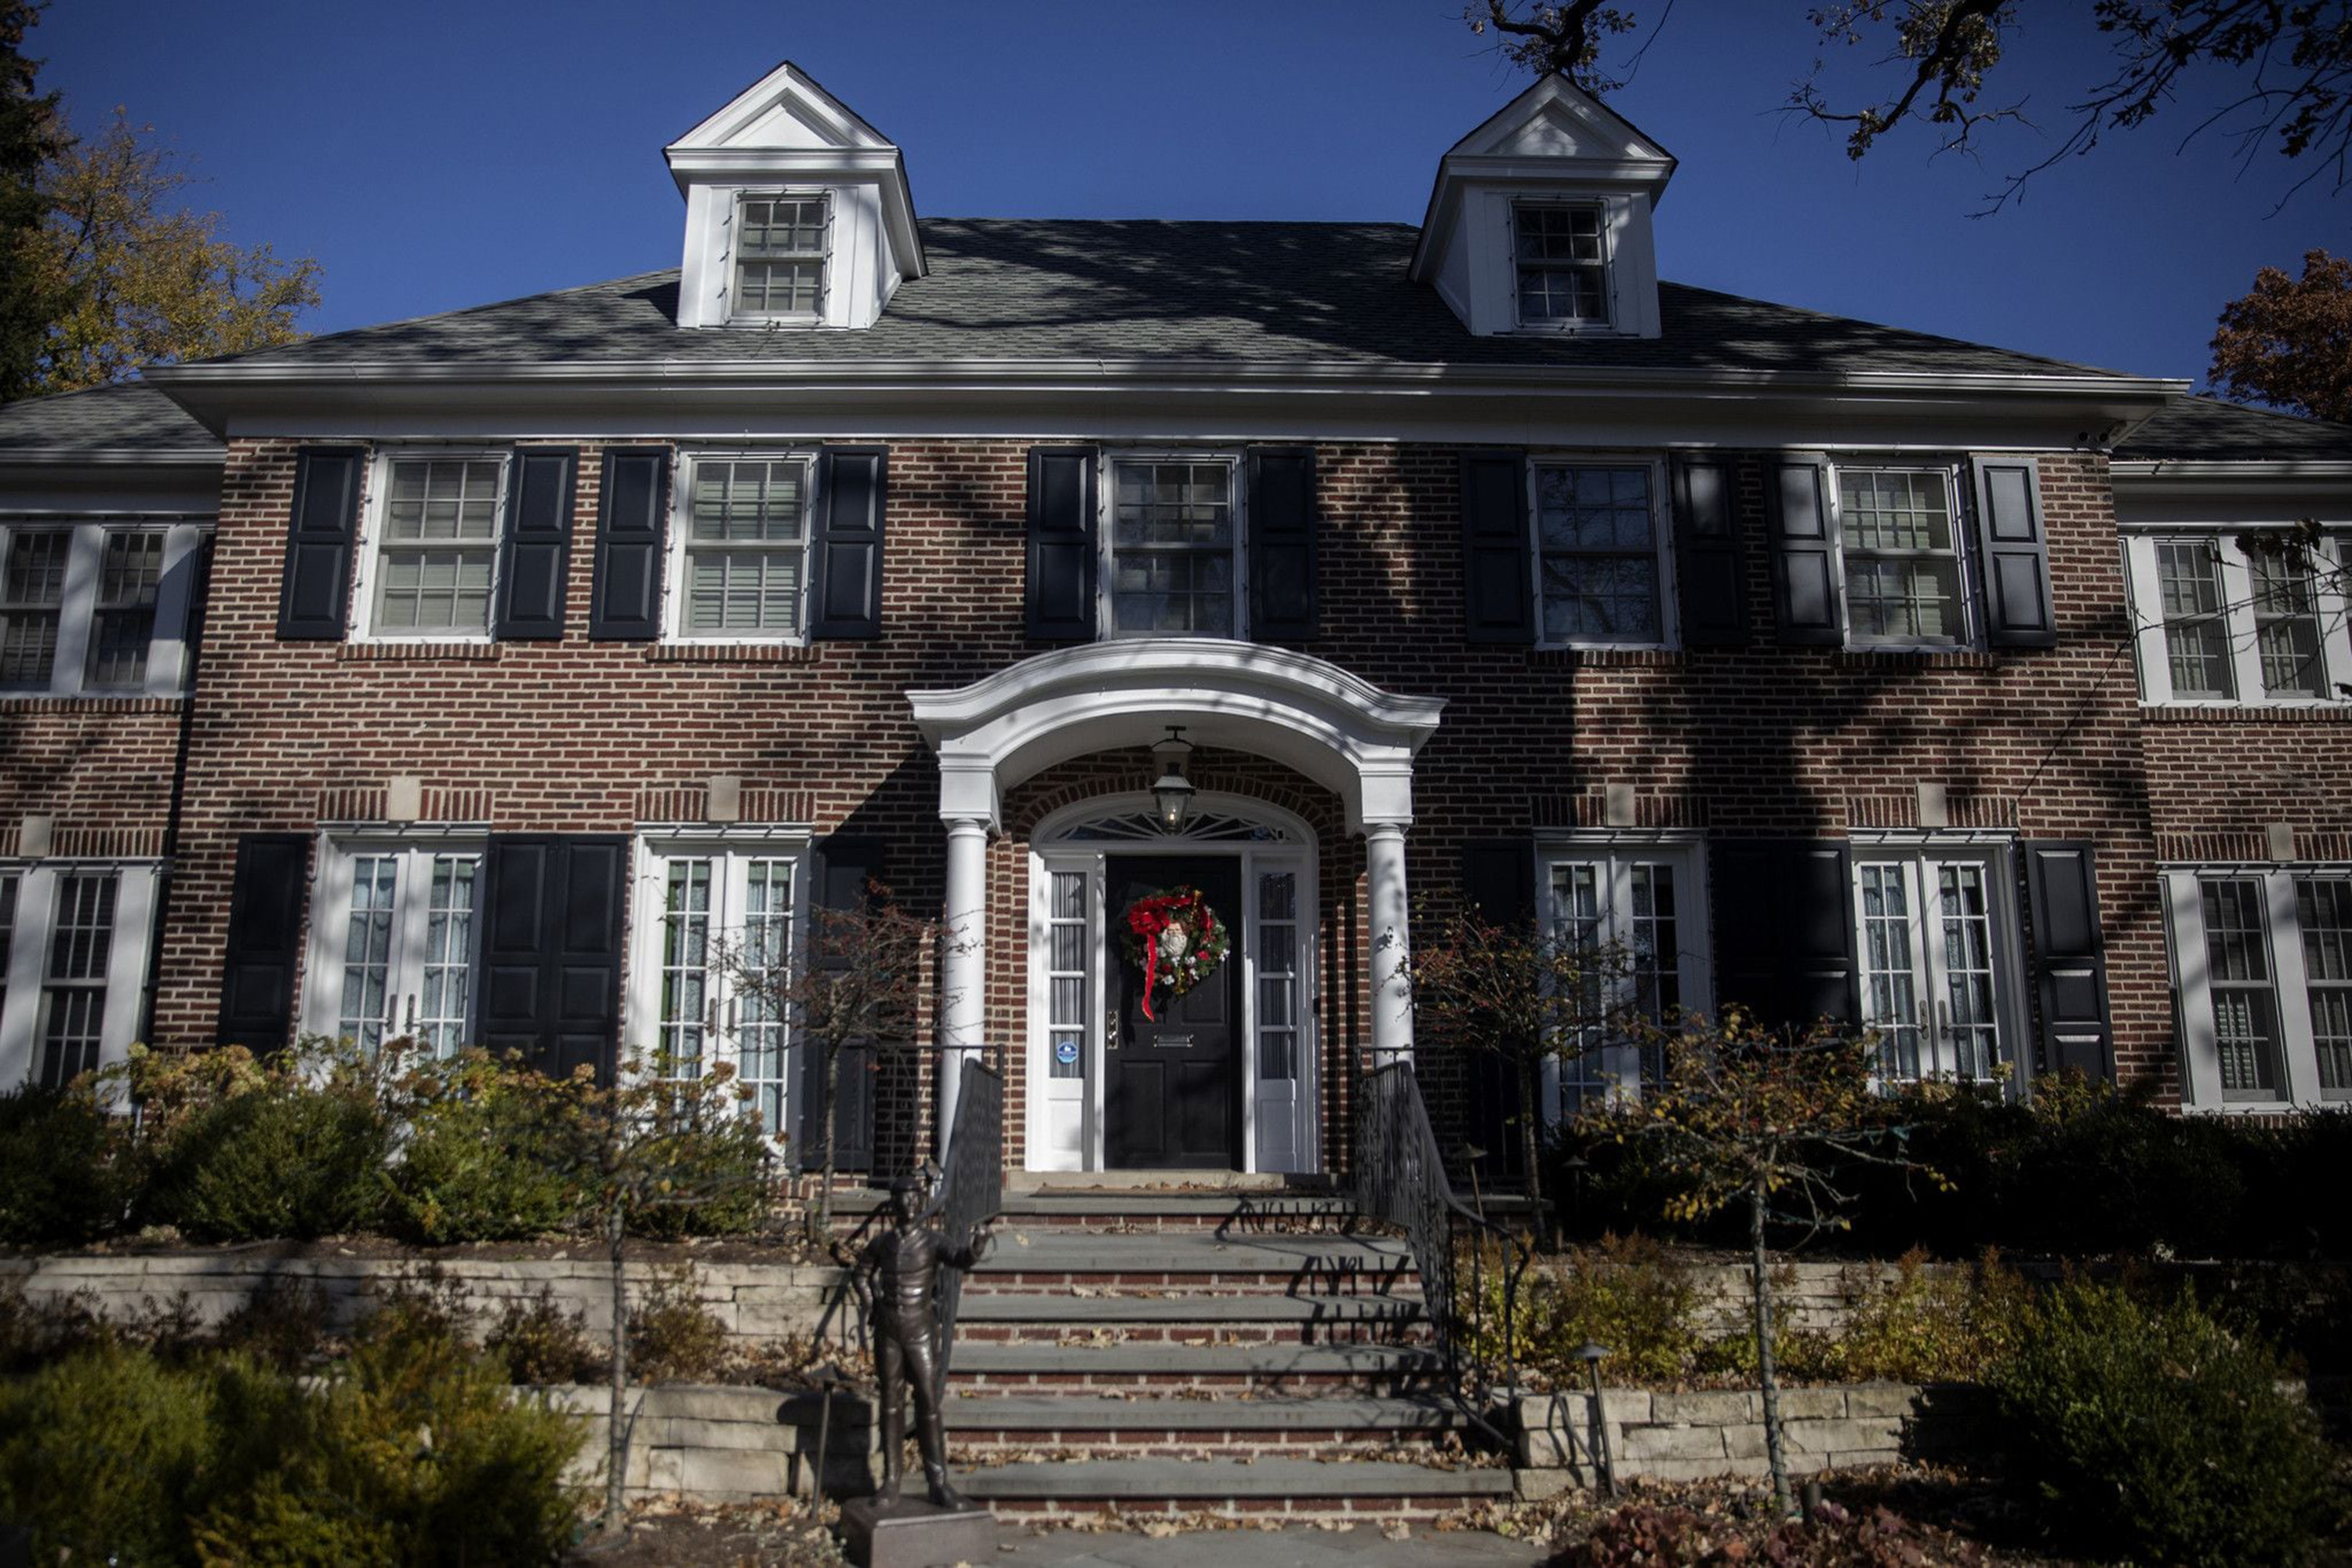 The real life "Home Alone" house in Winnetka, Illinois on November 8, 2021 | Source: Getty Images